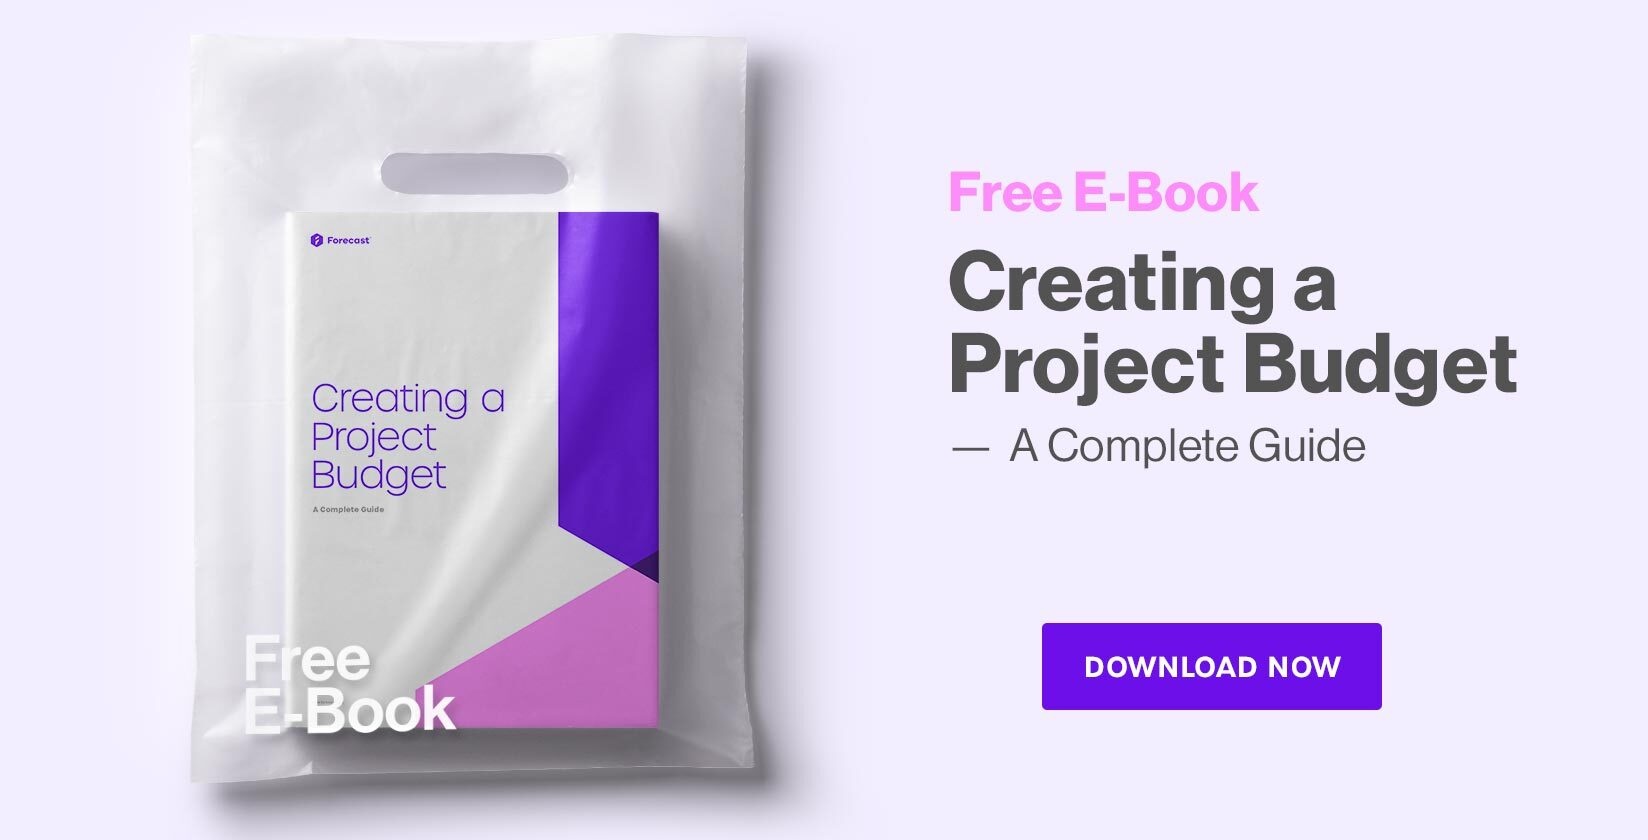 FREE E-BOOK: CREATING A PROJECT BUDGET – A COMPLETE GUIDE FOR 2020